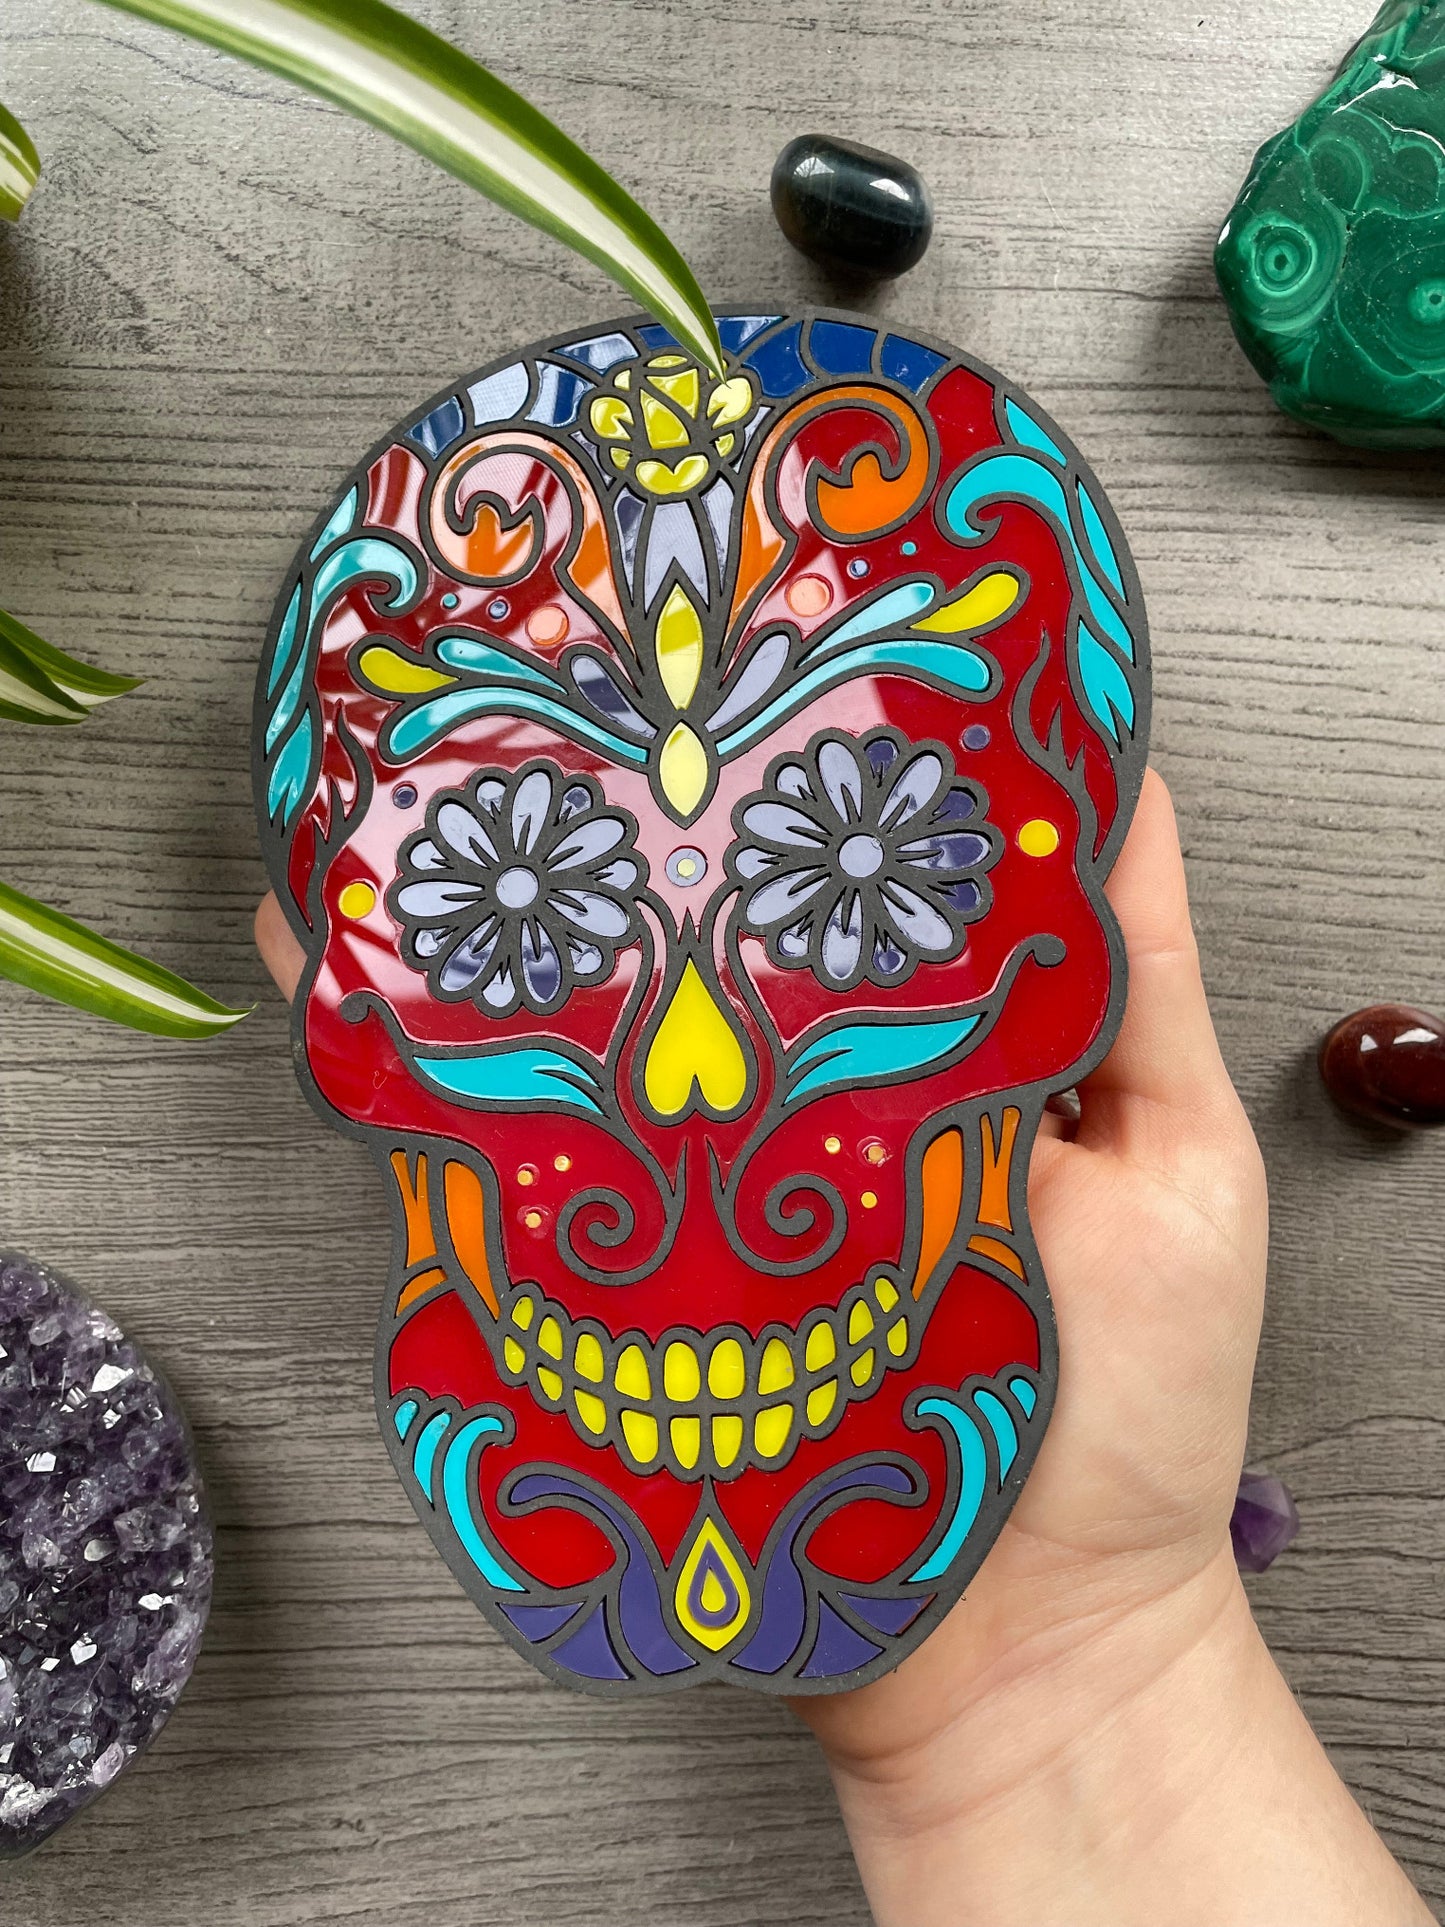 Pictured is a faux stained glass sugar skull made out of wood and acrylic. Sugar Skull Wall Art (Red) close up